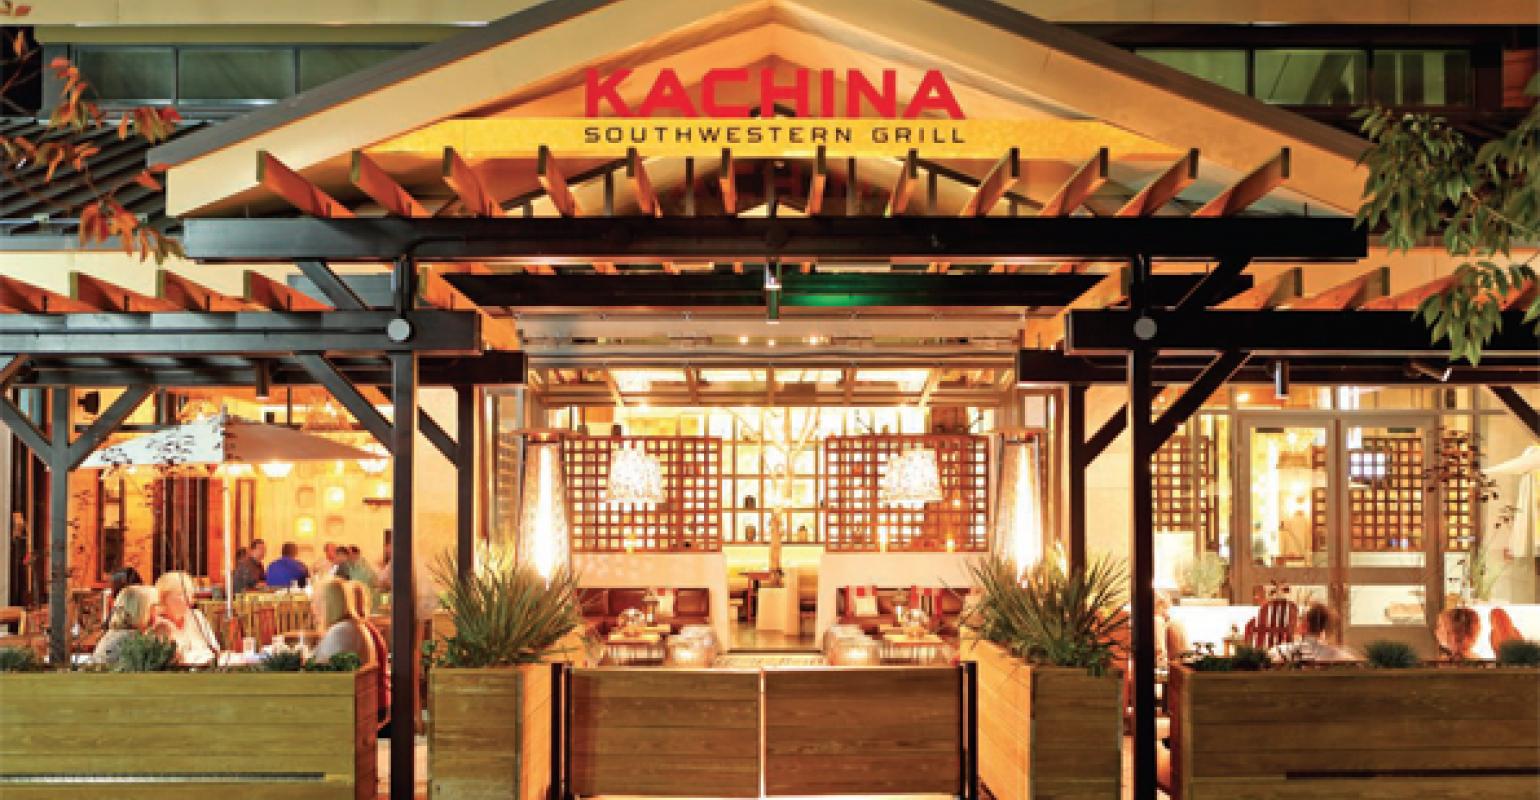 Sage Restaurant Group opens Kachina in Colorado hotel